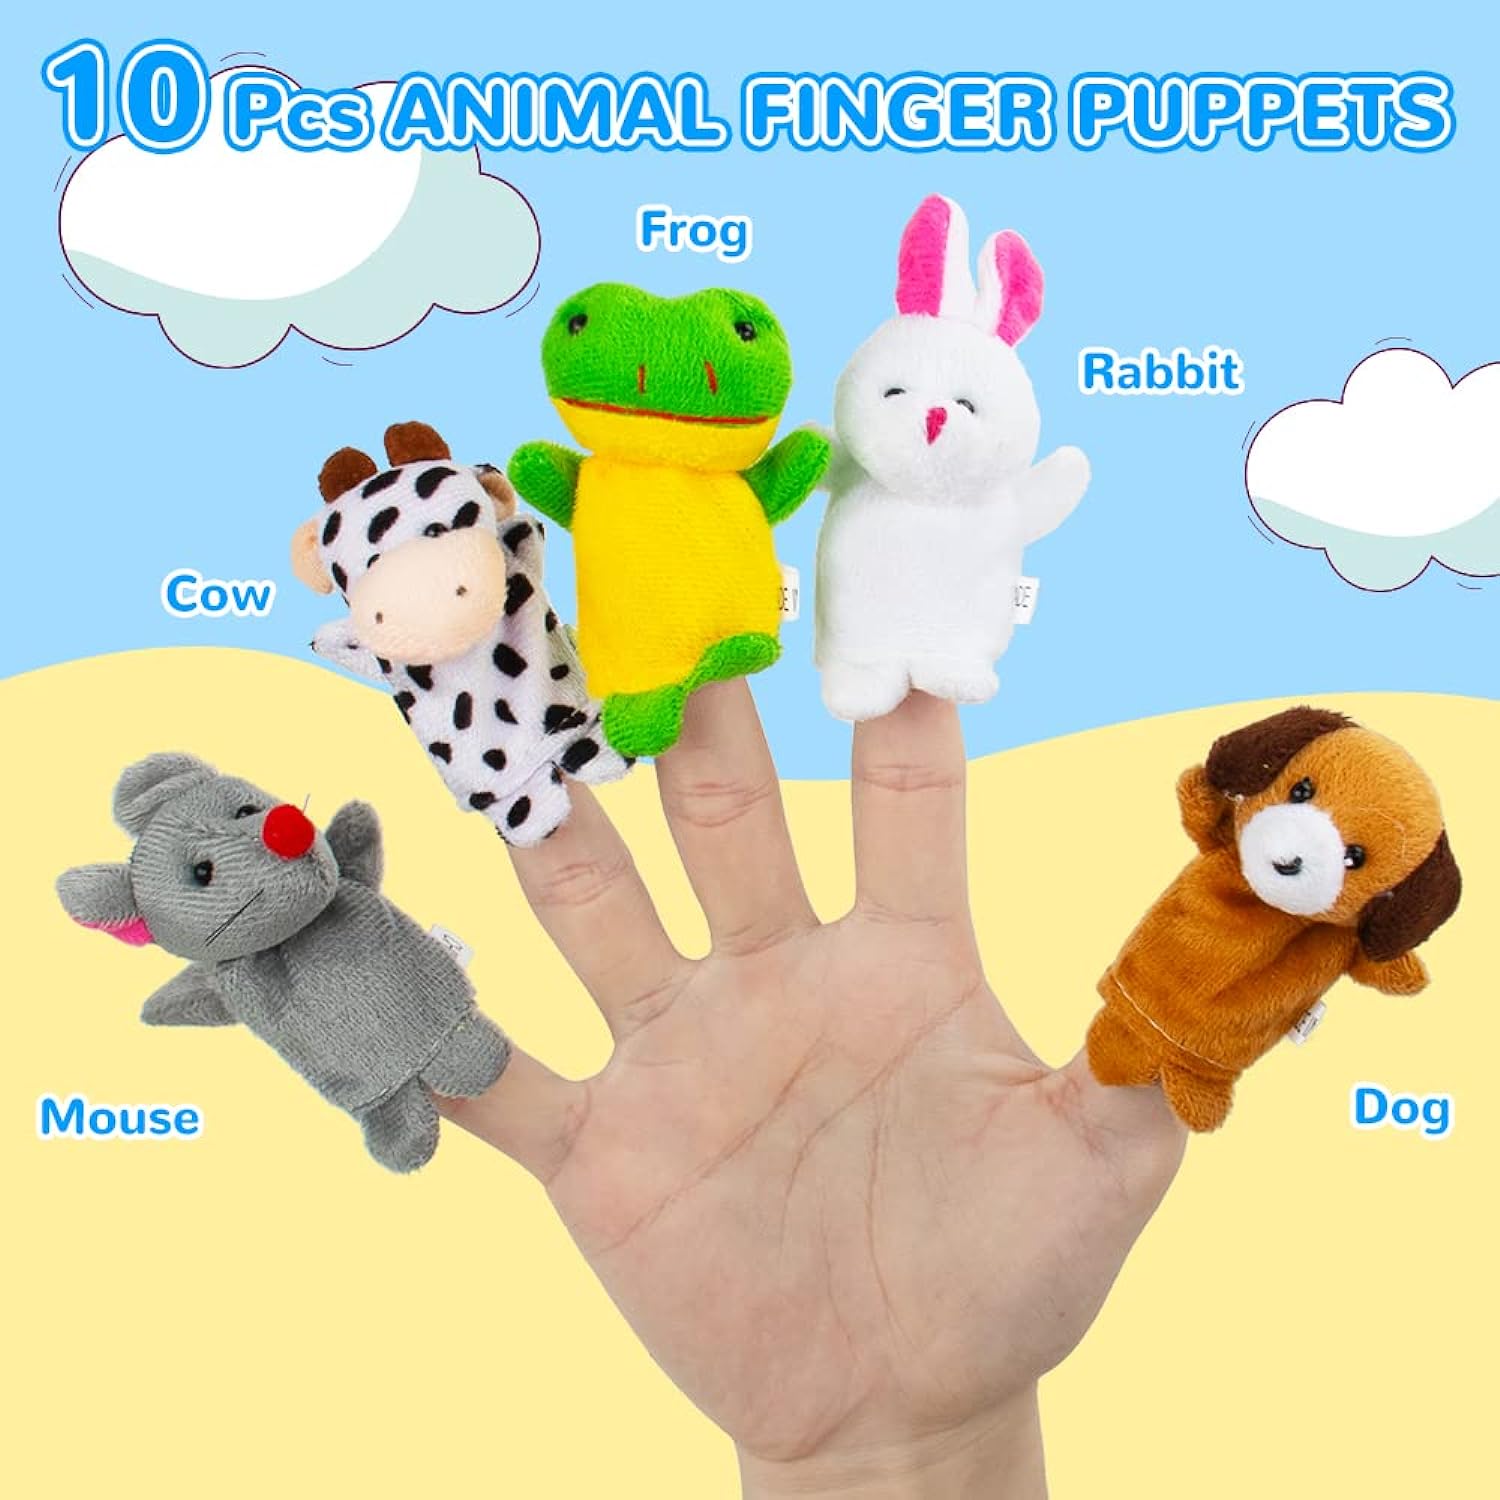 Great Choice Products Puppets With 2 Hand Puppets & 10 Finger Puppets - Soft Plush Animal Finger Puppet Toys For Kids, Mini Figures Toy Assortme